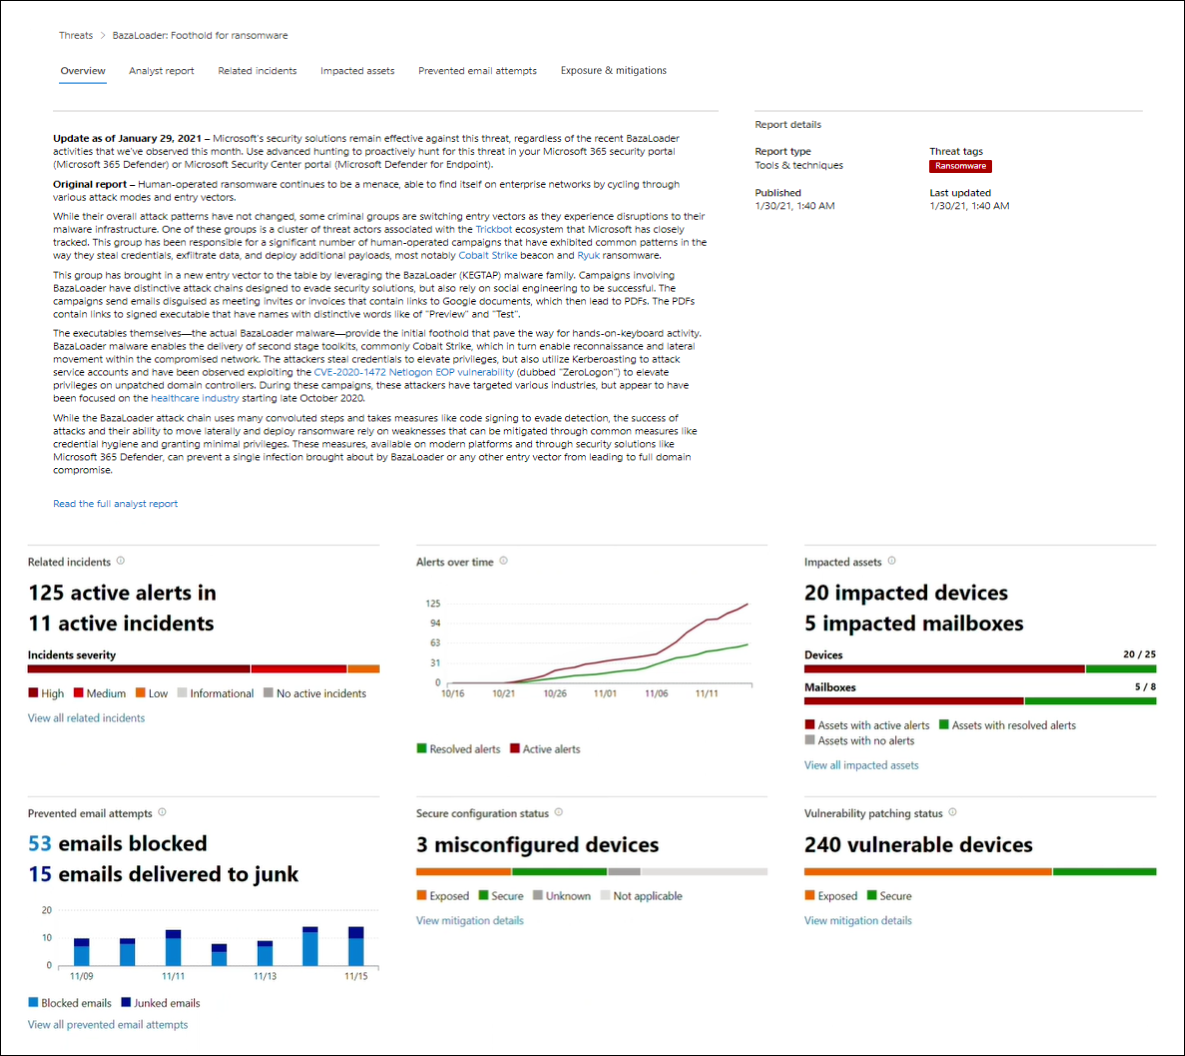 Screenshot of the overview section of a threat analytics report.